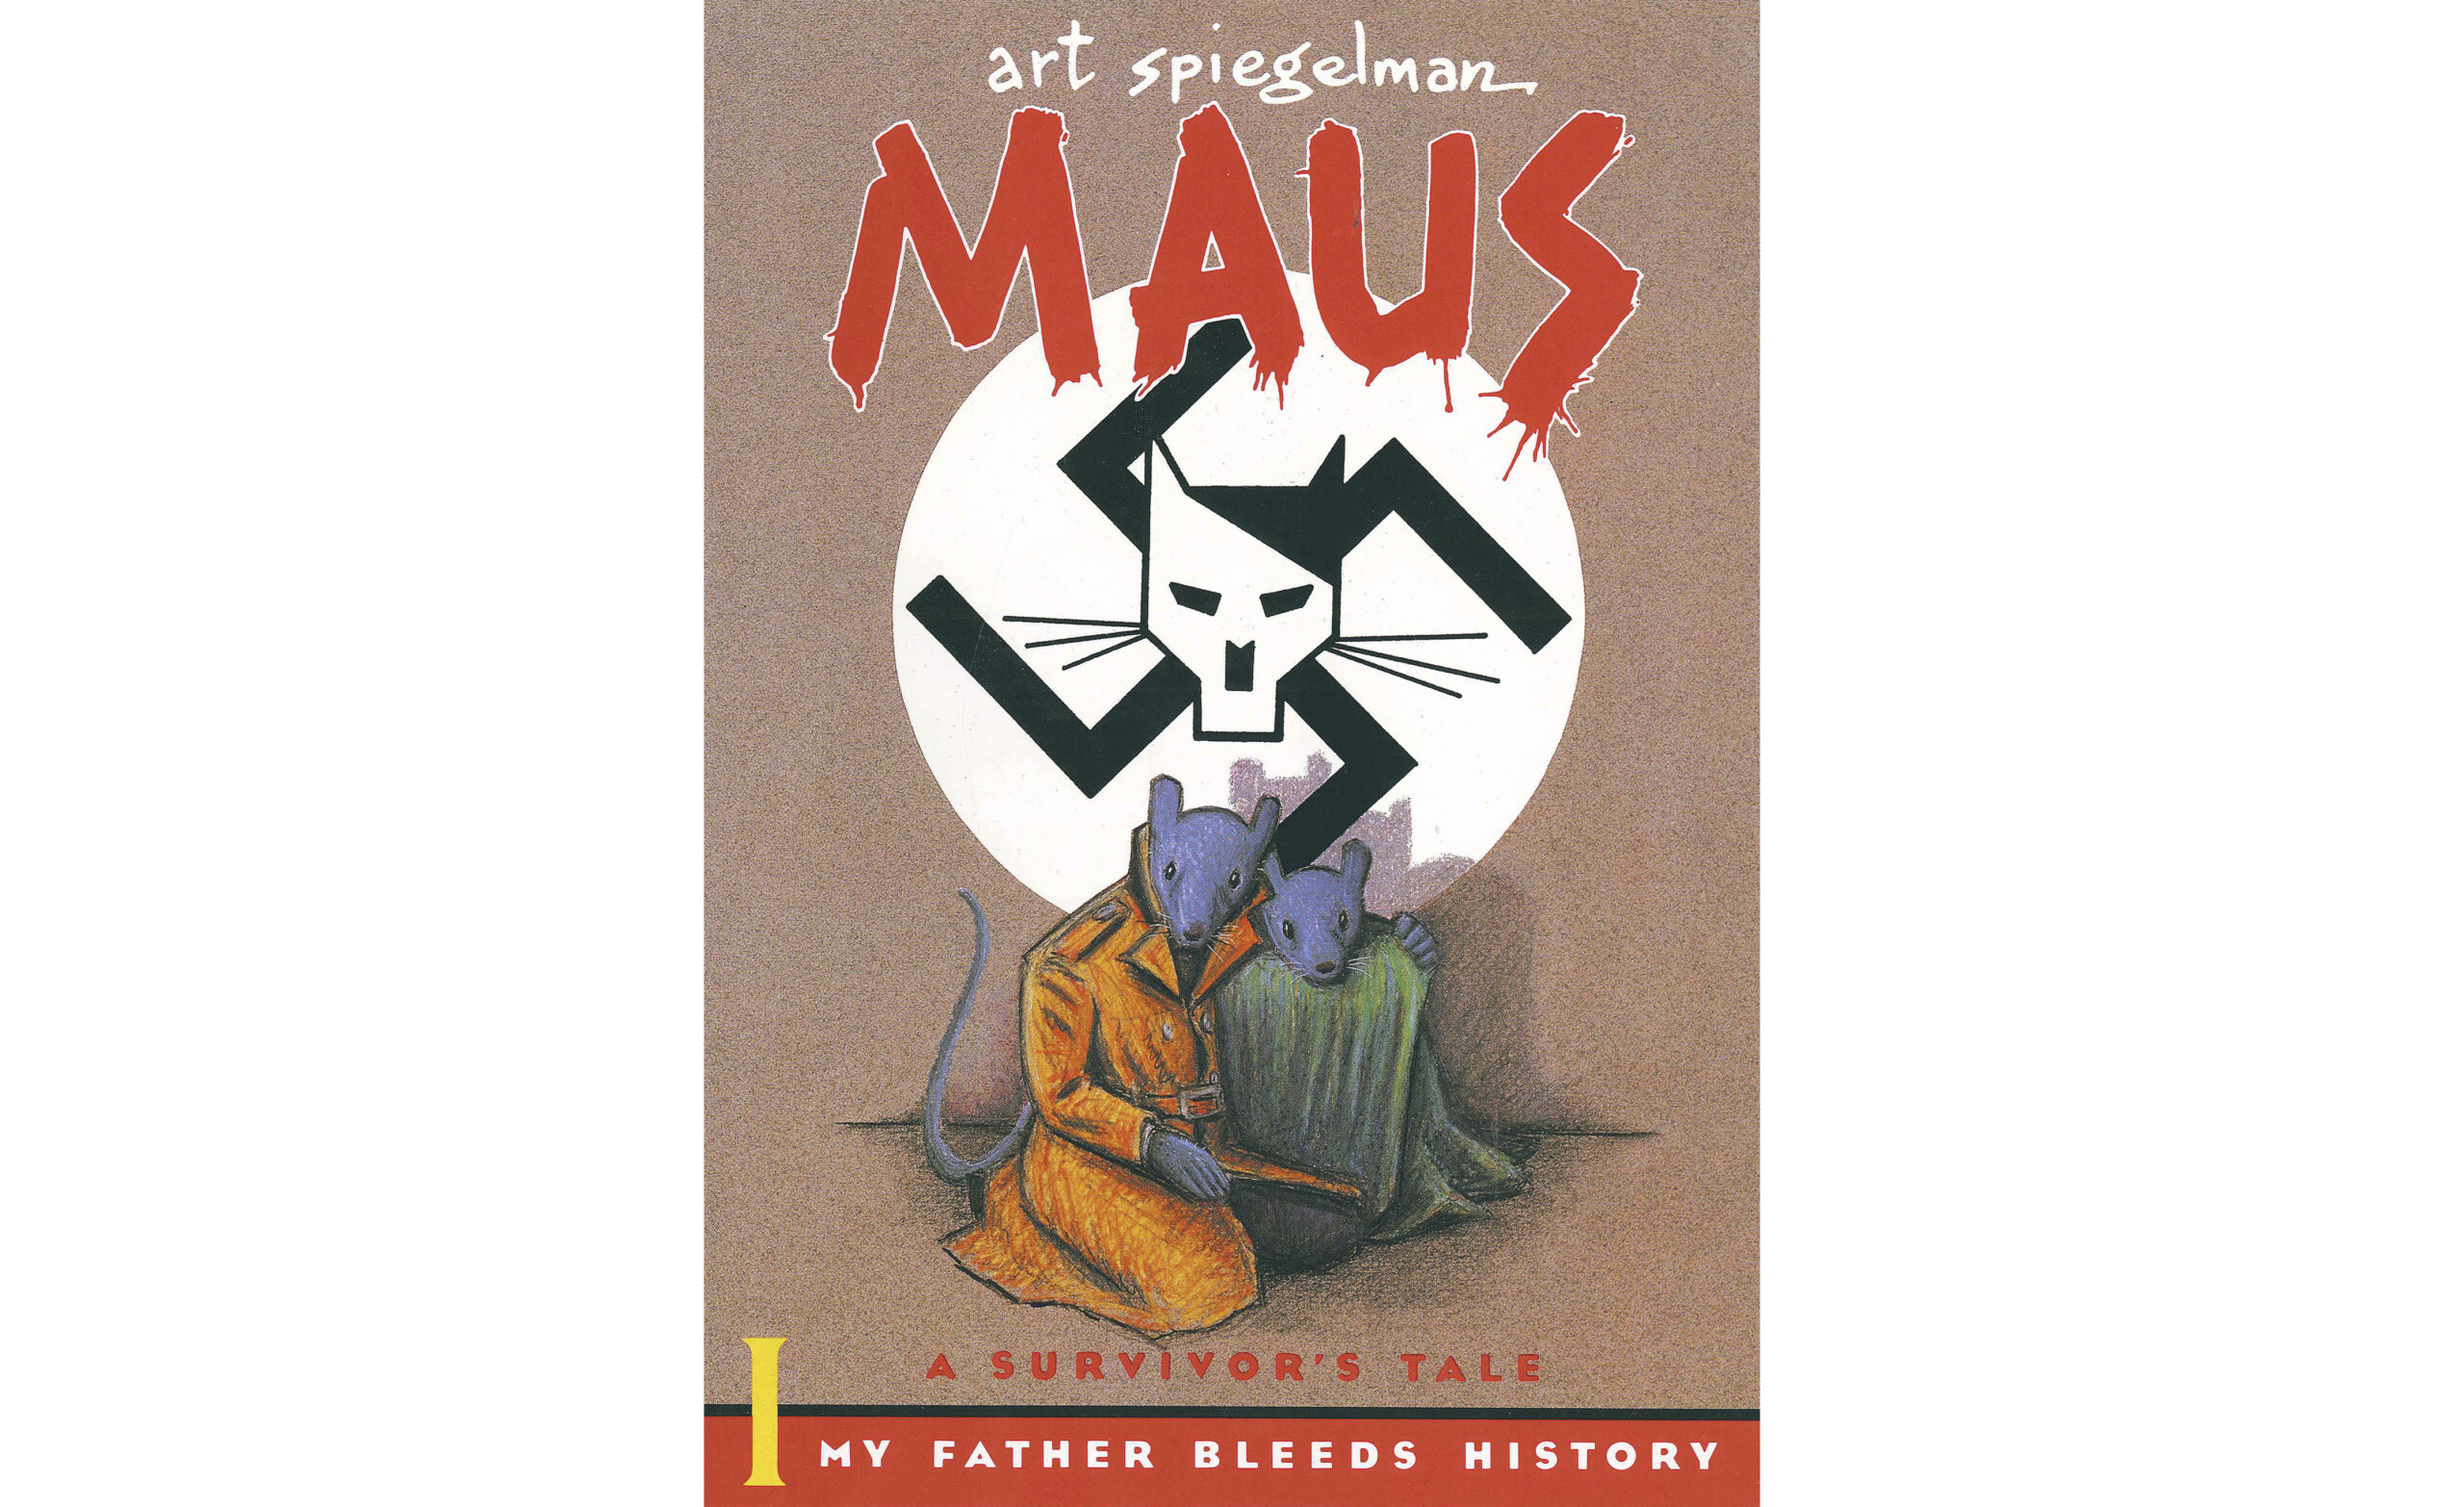 This cover image released by Pantheon shows "Maus" a graphic novel by Art Spiegelman. A Tennessee school district has voted to ban the Pulitzer Prize winning graphic novel about the Holocaust due to “inappropriate language” and an illustration of a nude woman. (Pantheon via AP)